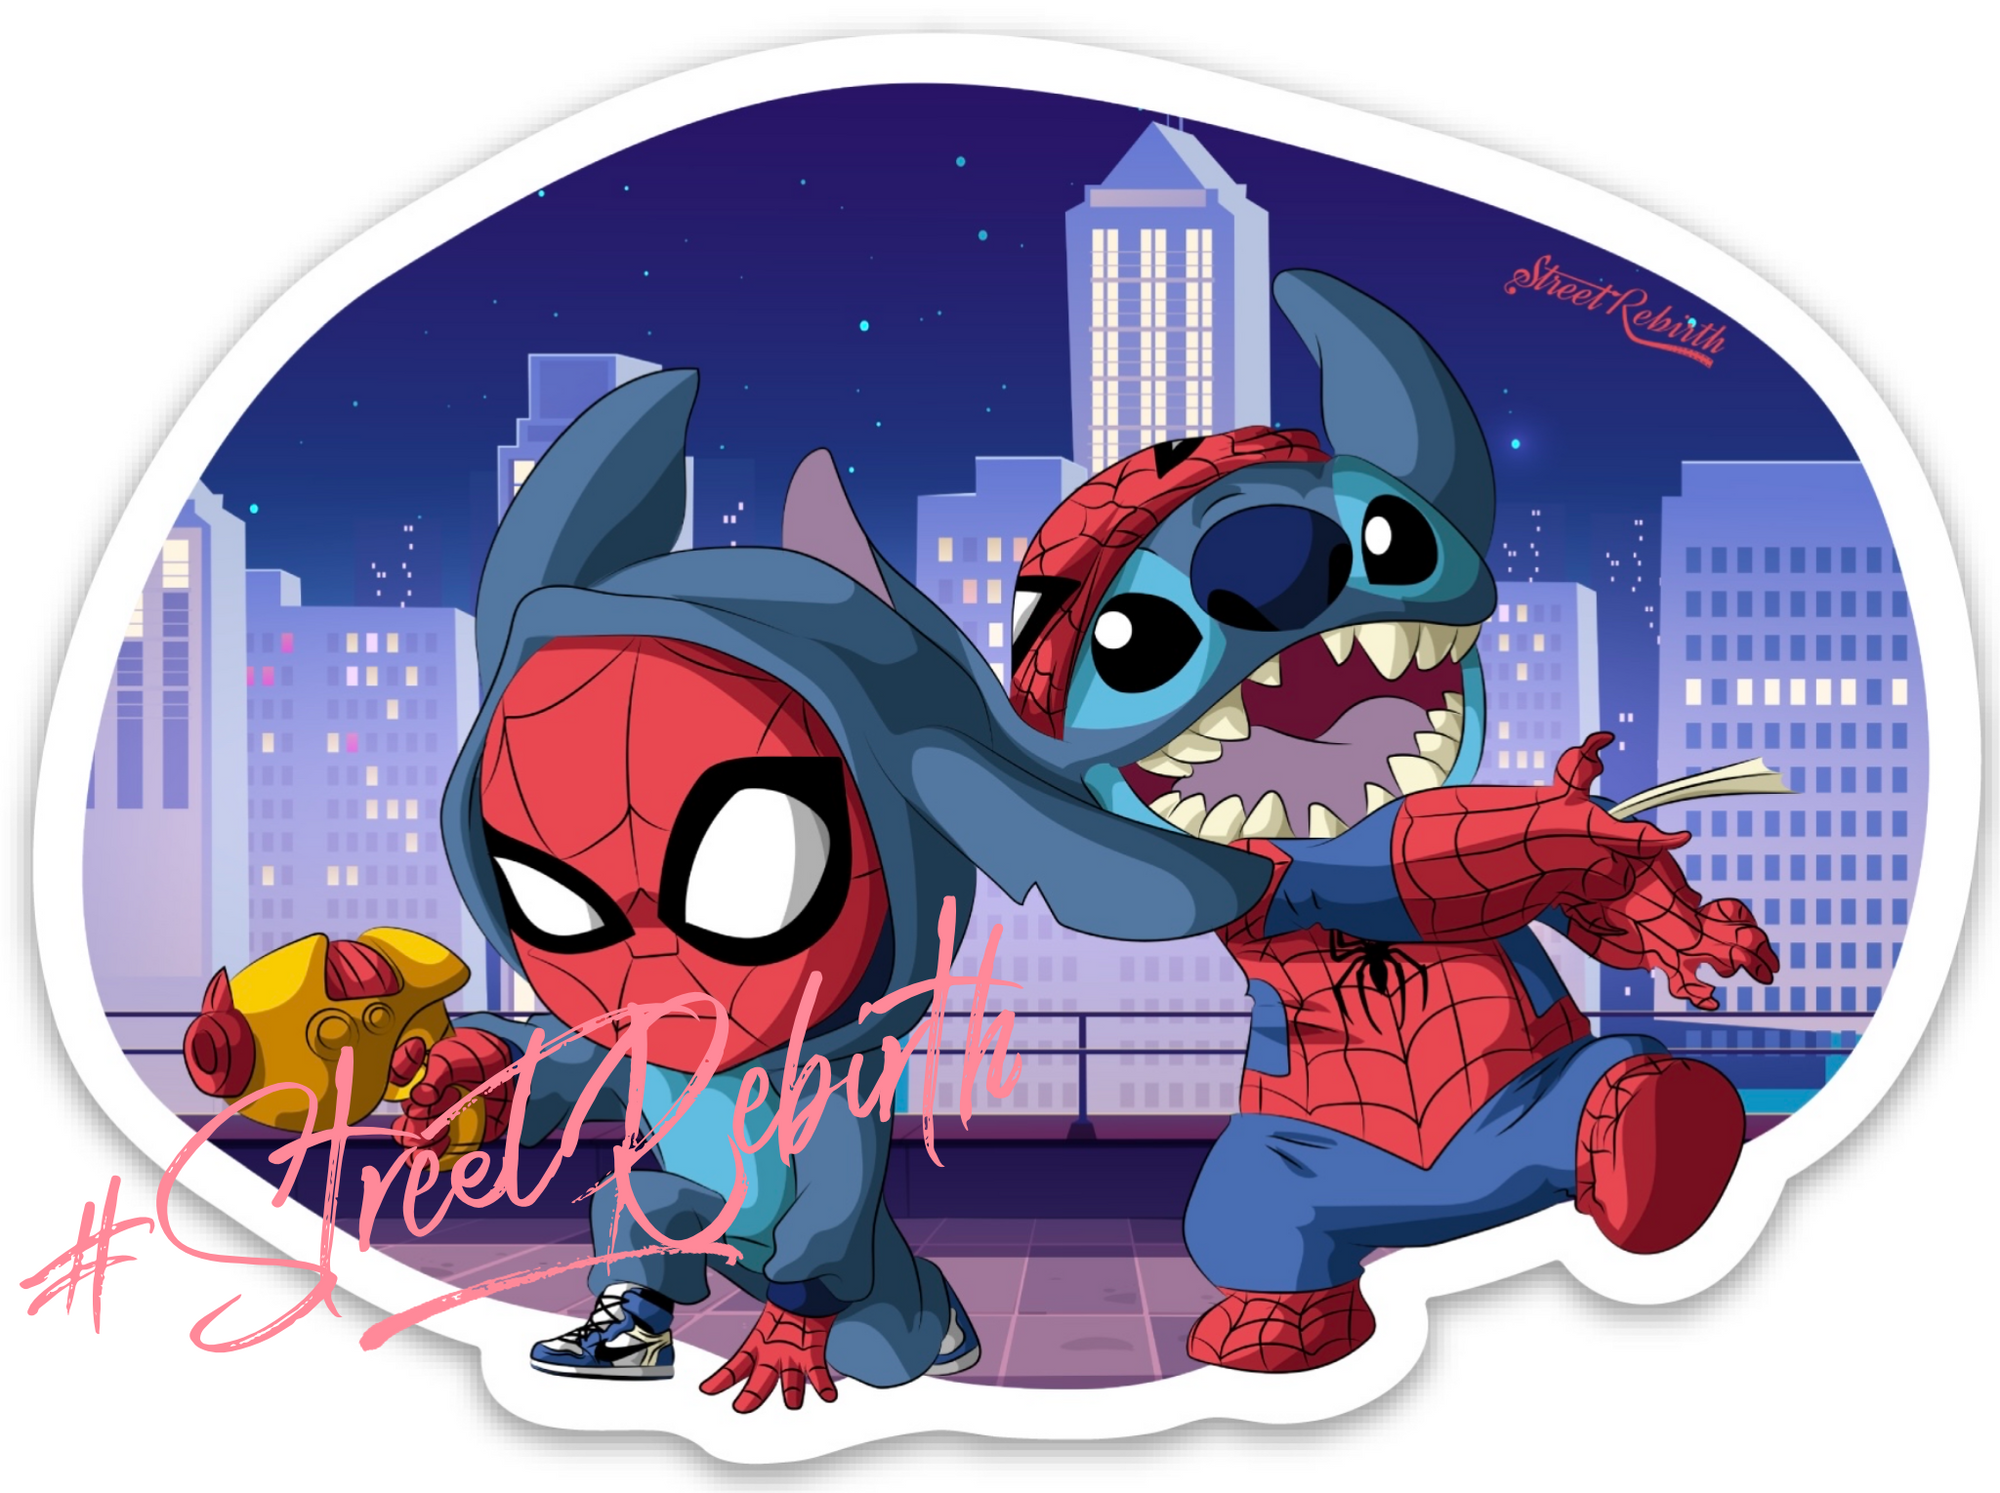 Stitch And Spidy Sticker – One 4 Inch Water Proof Vinyl Sticker – For Hydro Flask, Skateboard, Laptop, Planner, Car, Collecting, Gifting